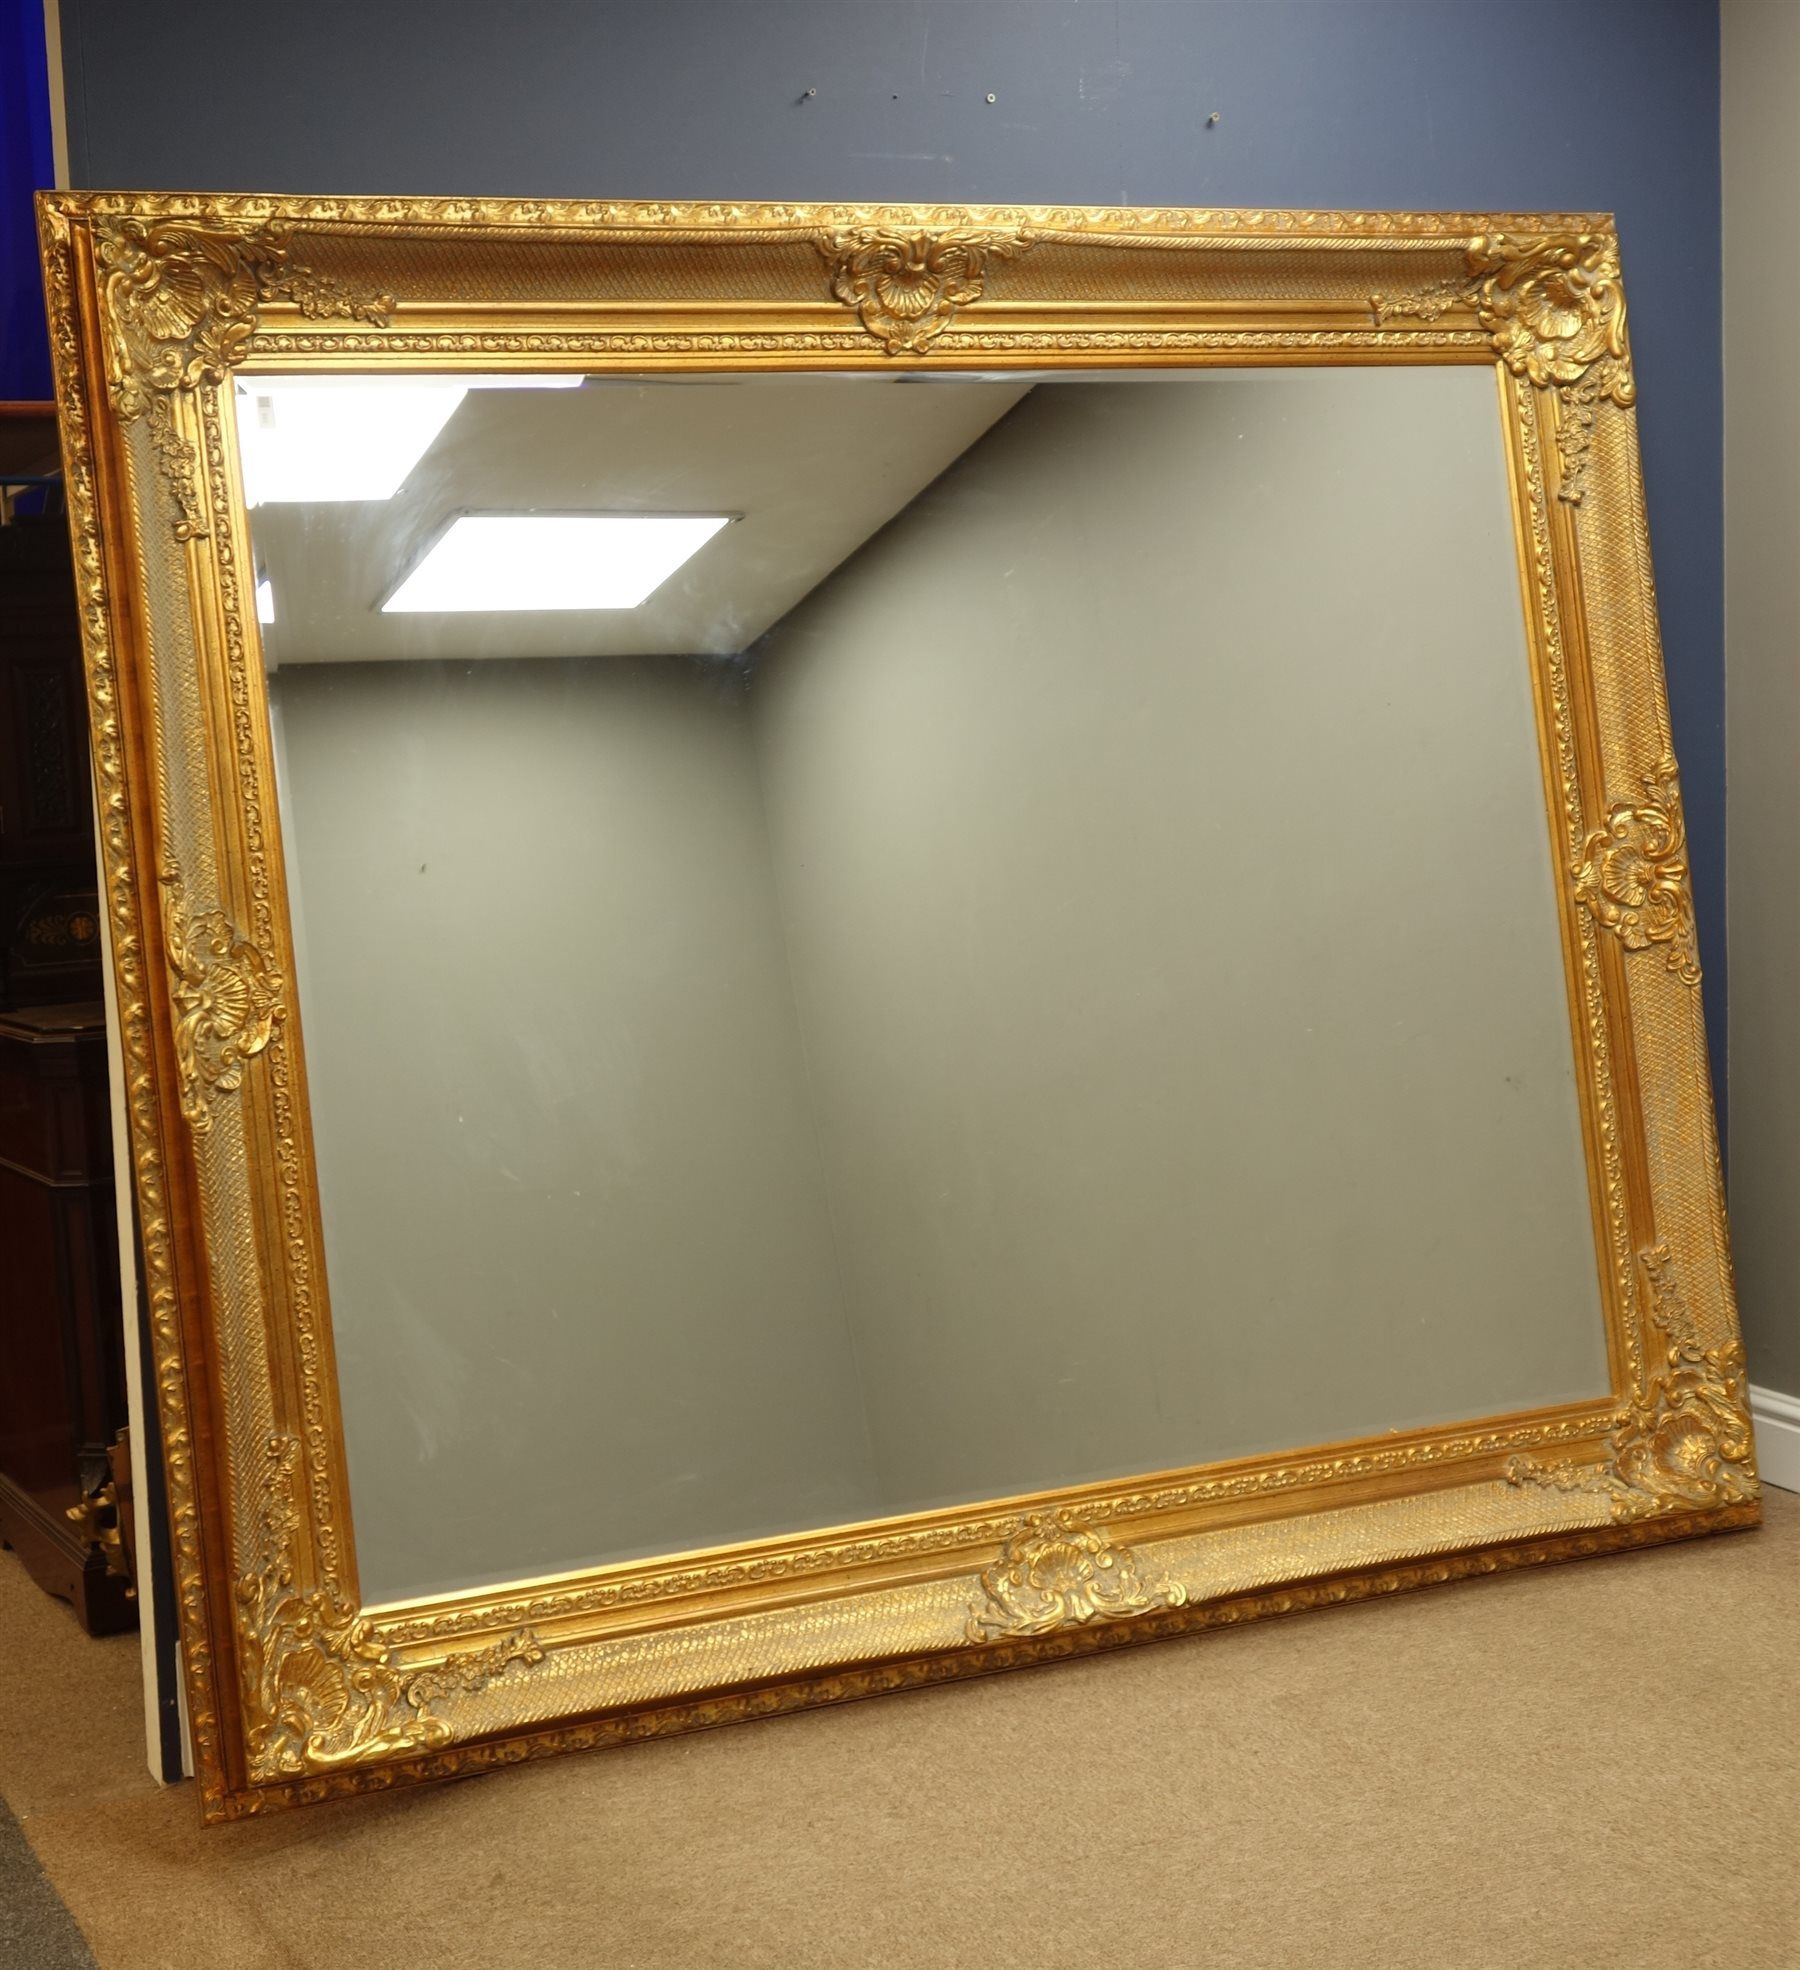 Large Rectangular Bevelled Edge Wall Mirror In Ornate Swept Gilt Frame Throughout Edged Wall Mirrors (View 3 of 15)